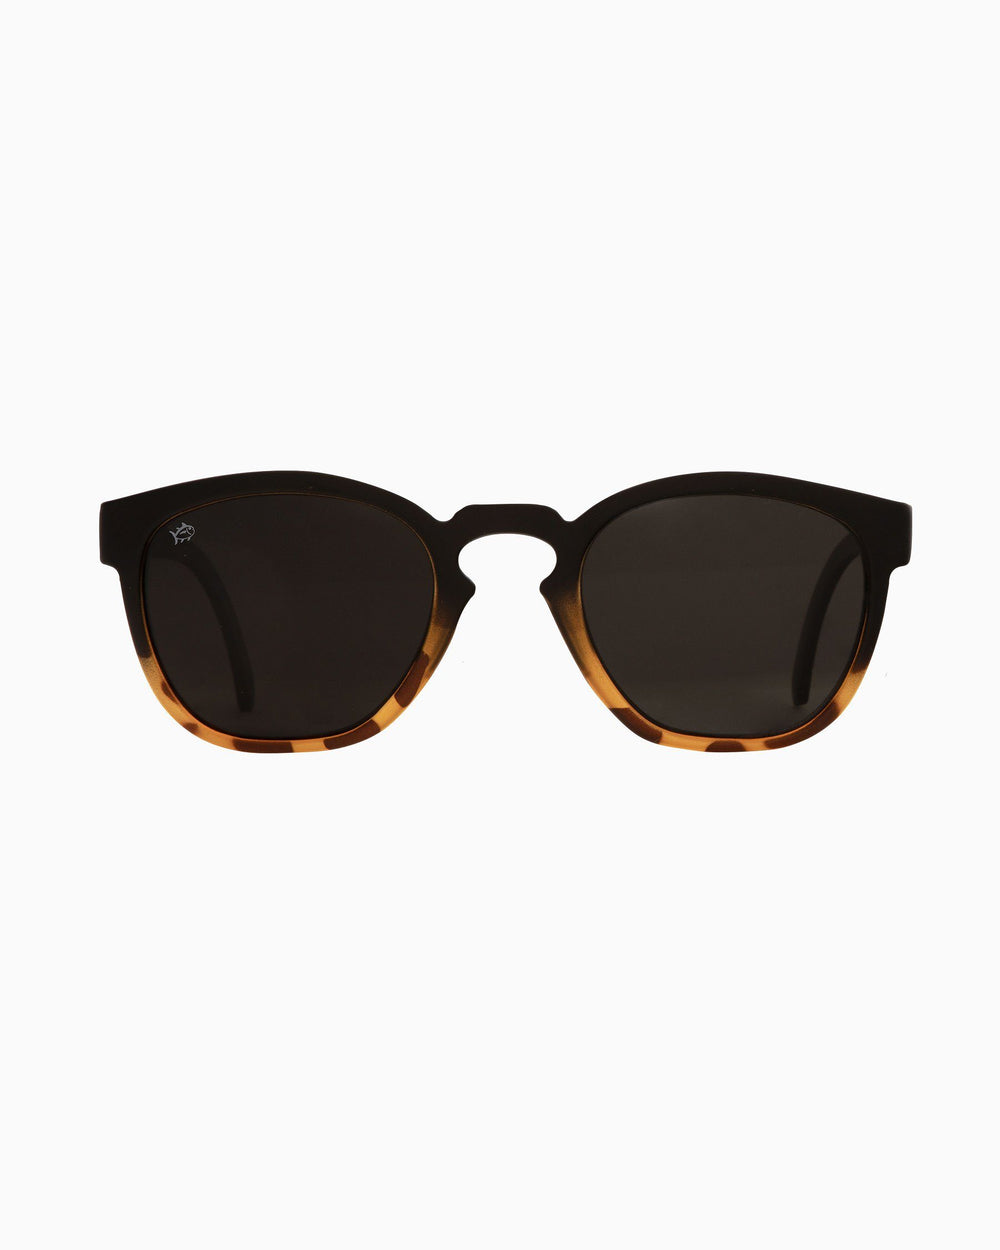 The front of the Rheos Seabrooks Sunglasses by Southern Tide - Gradient Gunmetal